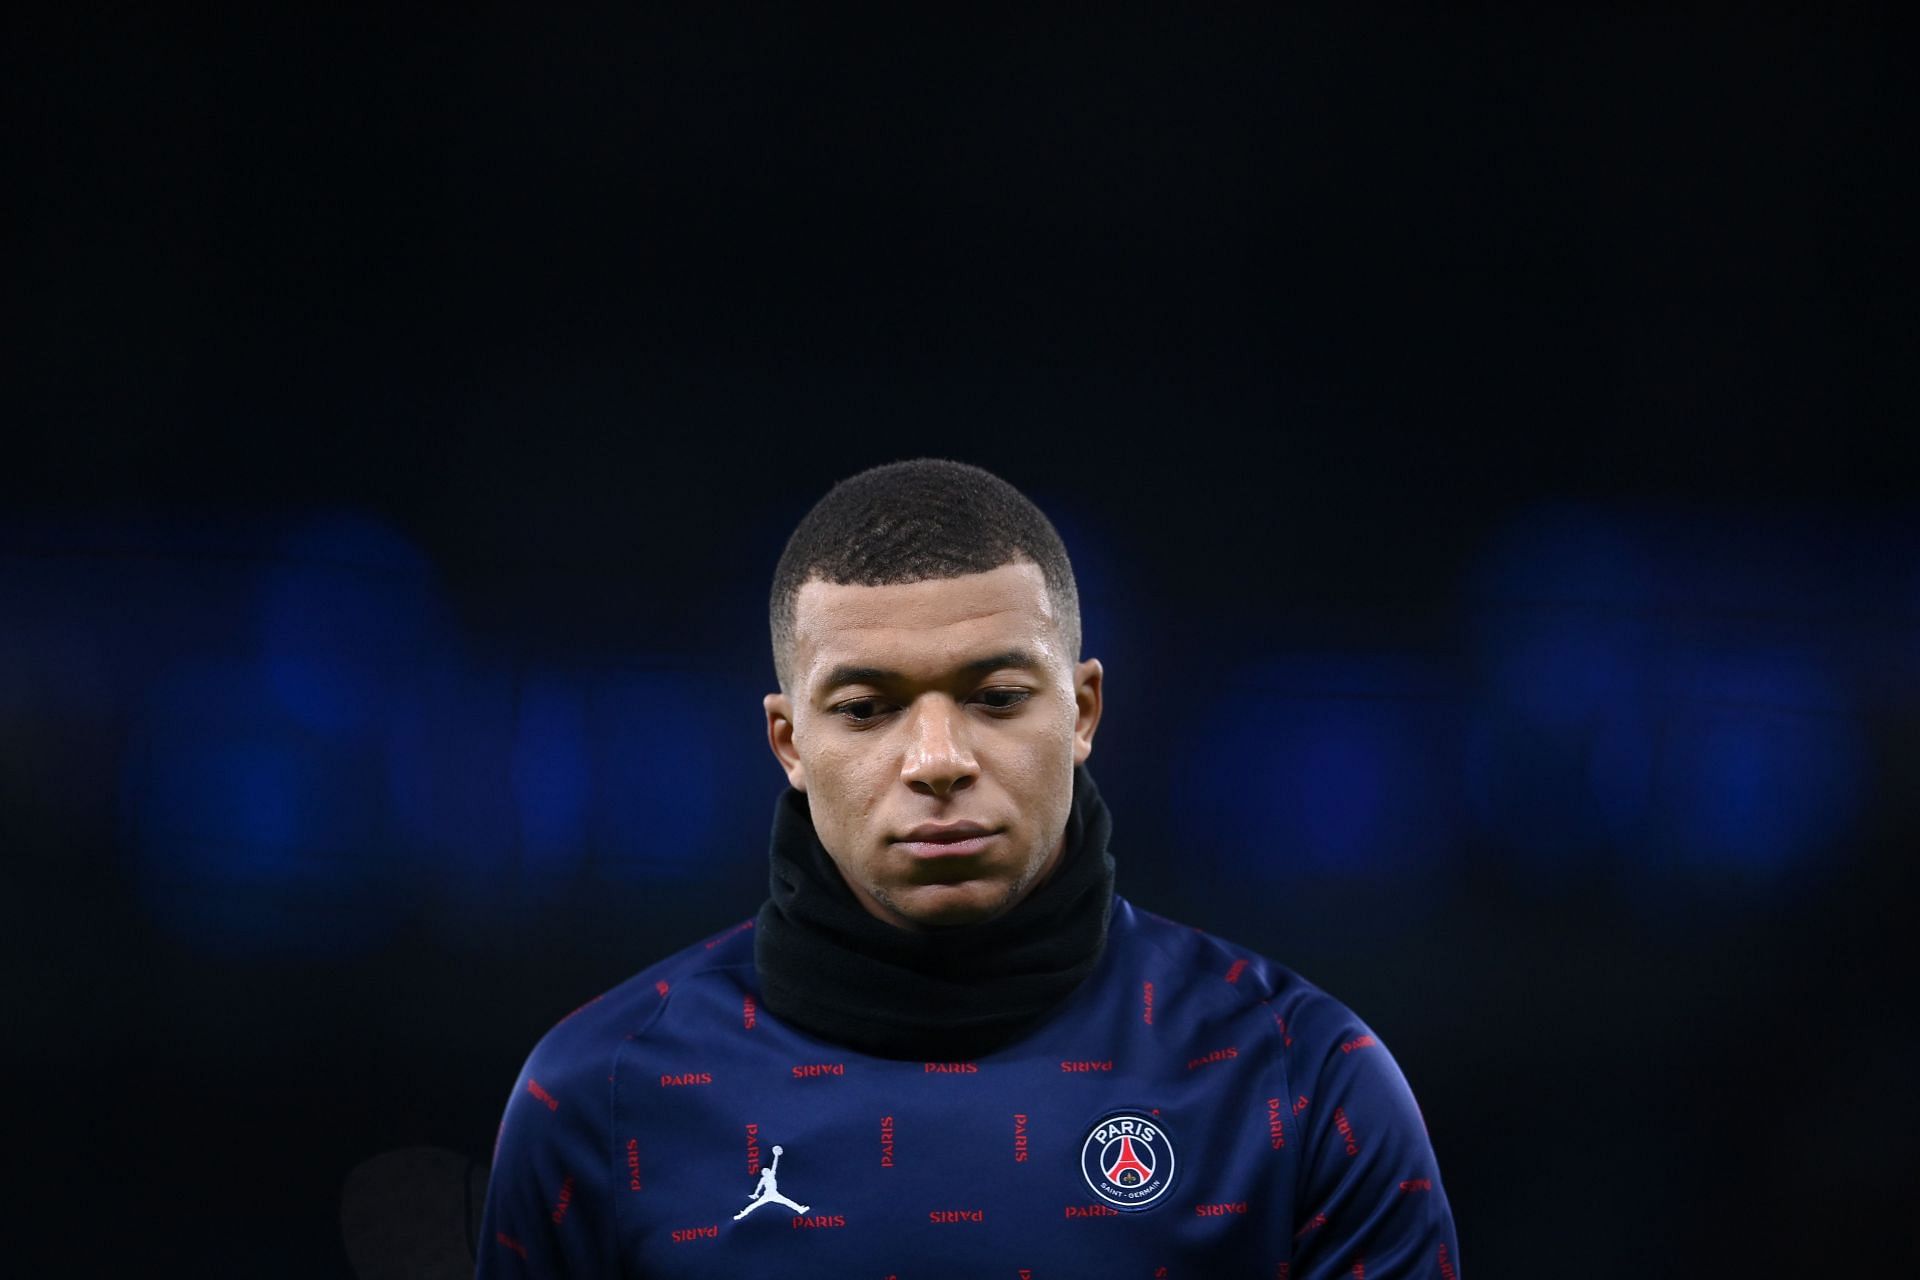 Toni Kroos wants Kylian Mbappe (in pic) to join him at Real Madrid.